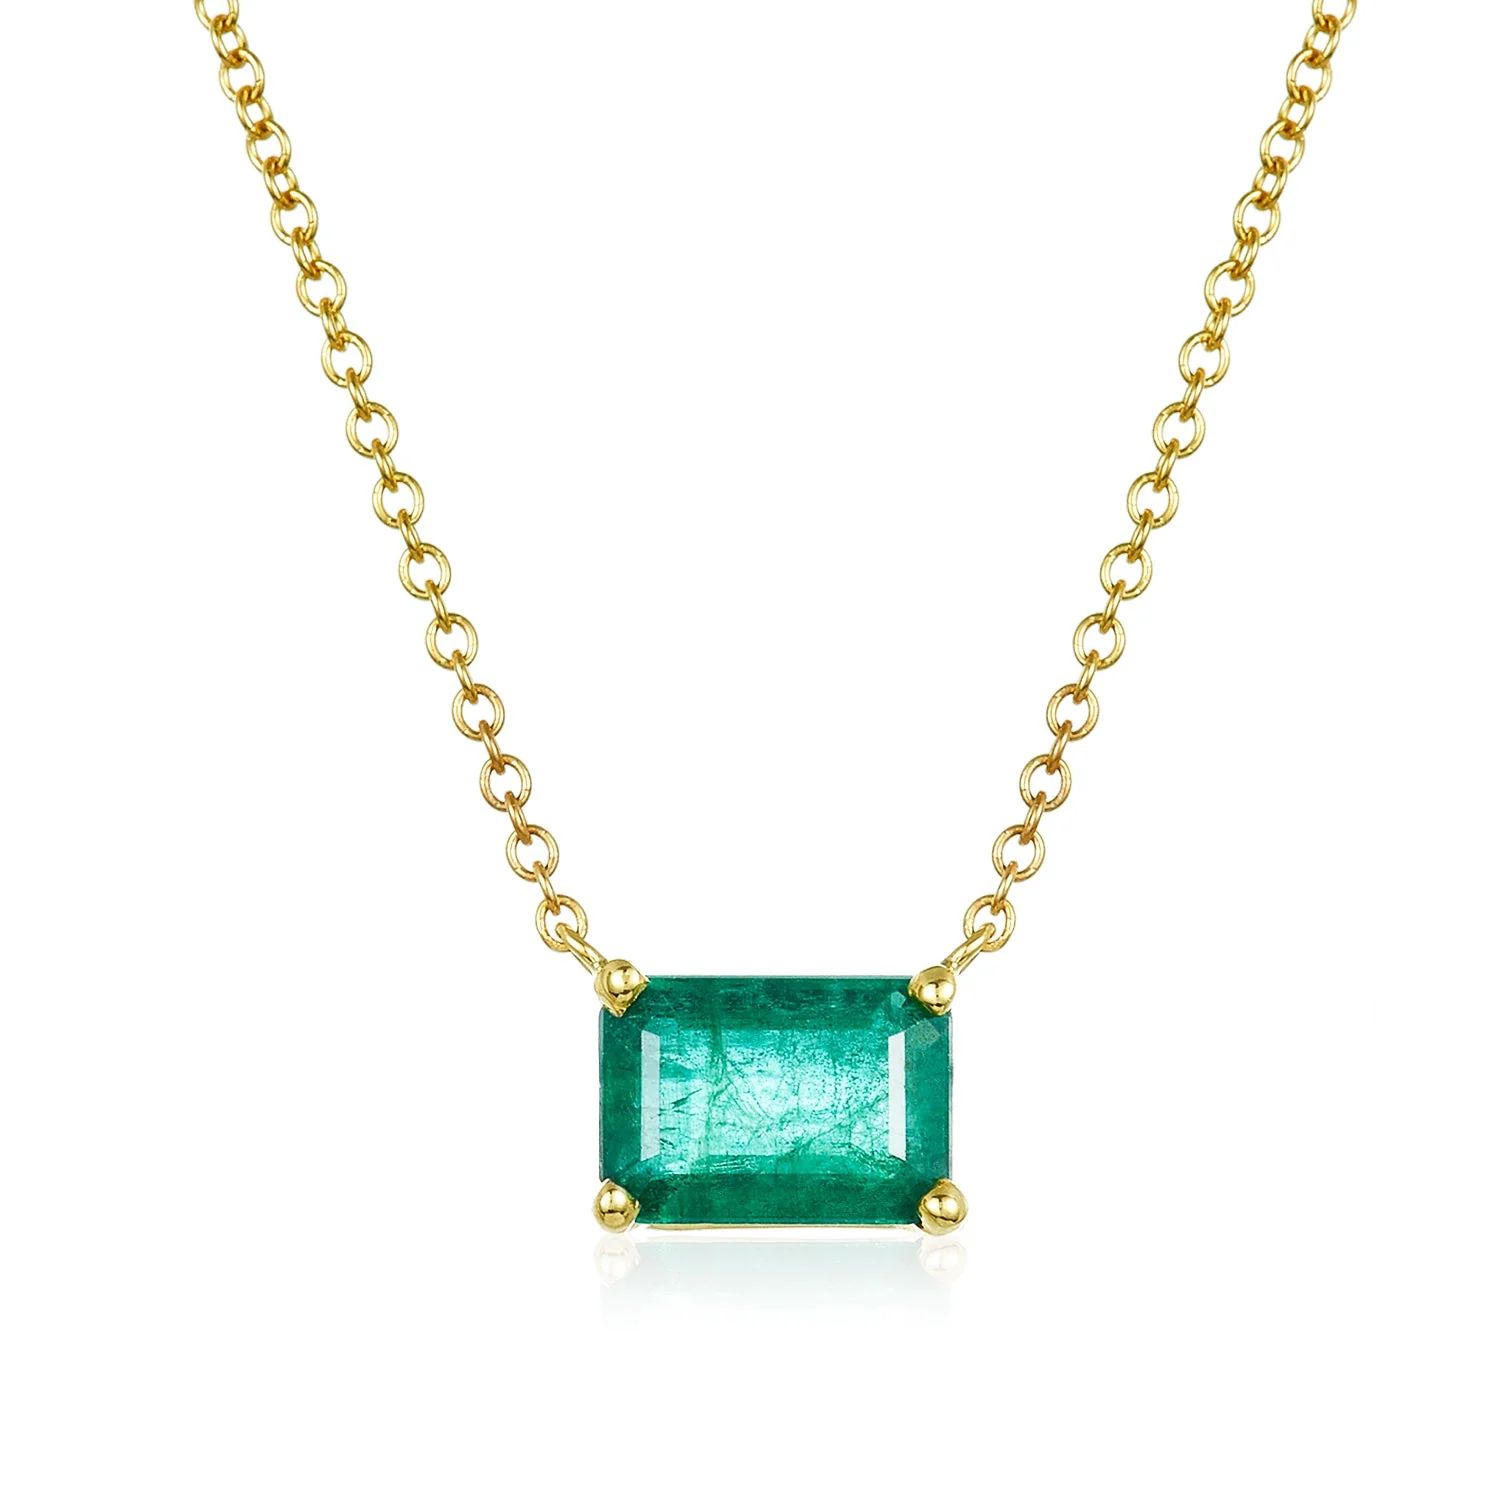 Emerald Necklace | LINDSEY LEIGH JEWELRY